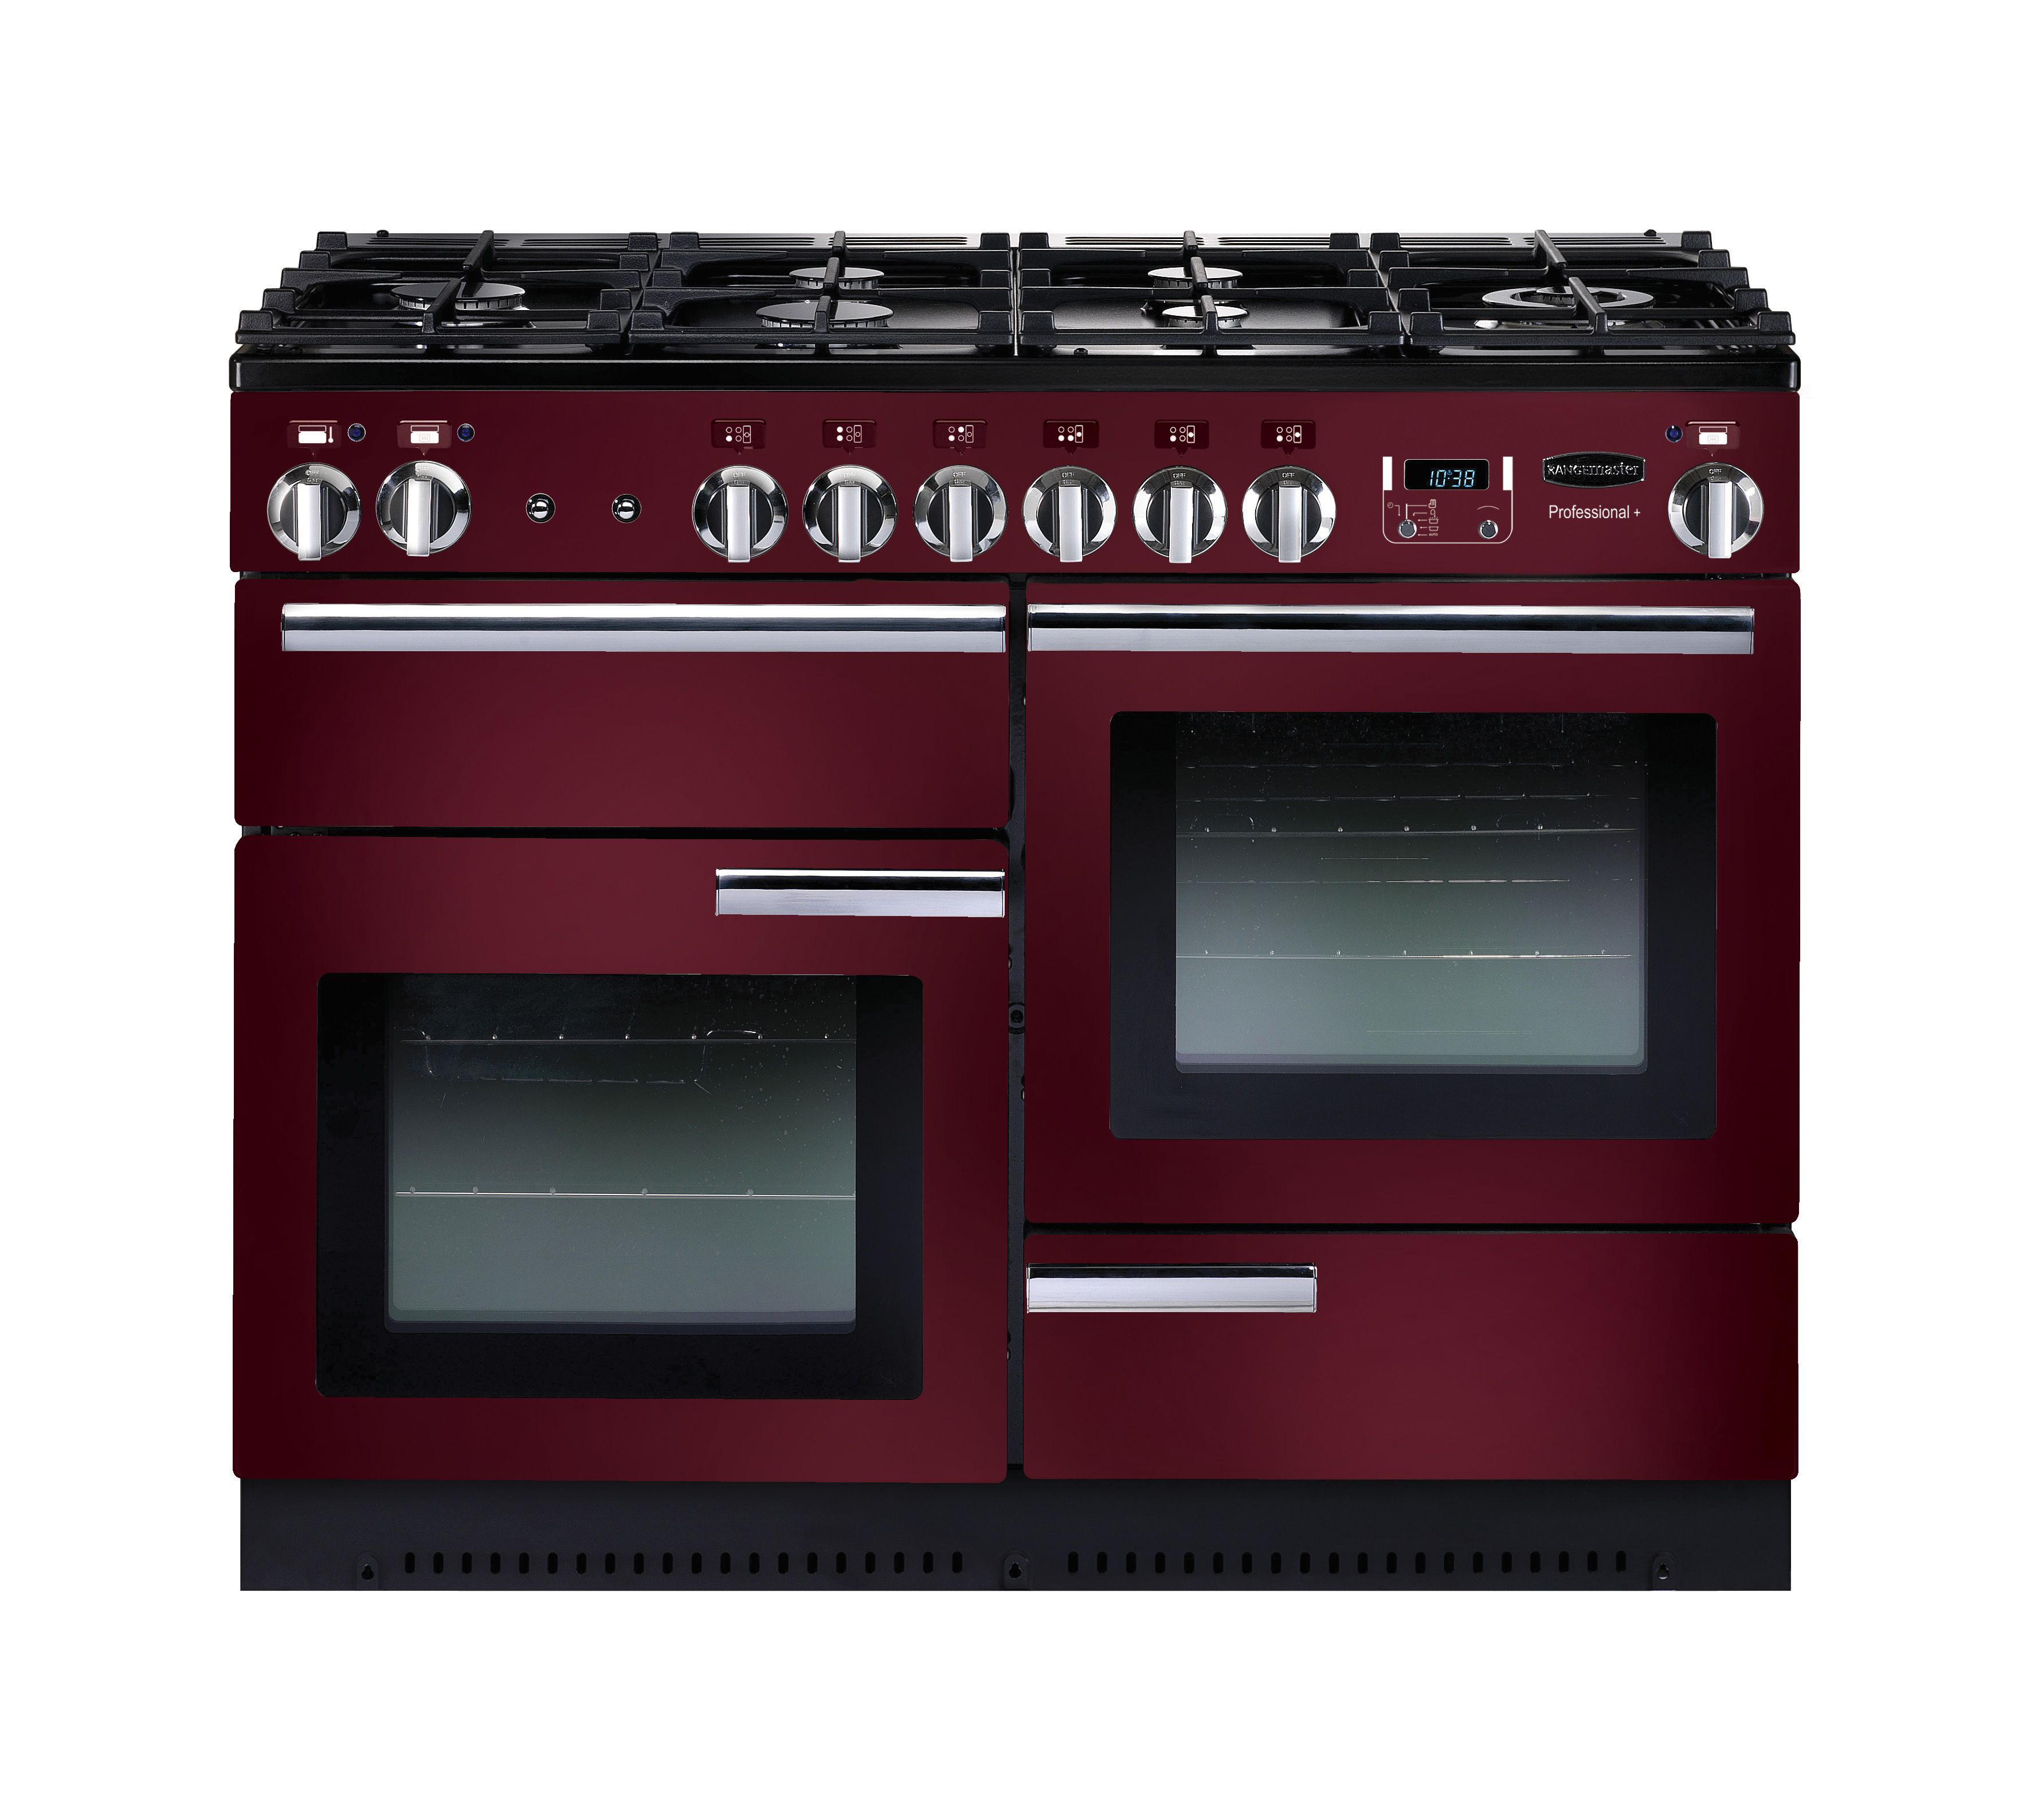 Rangemaster Professional Plus PROP110DFFCY/C 110cm Dual Fuel Range Cooker - Cranberry / Chrome - A/A Rated, Red